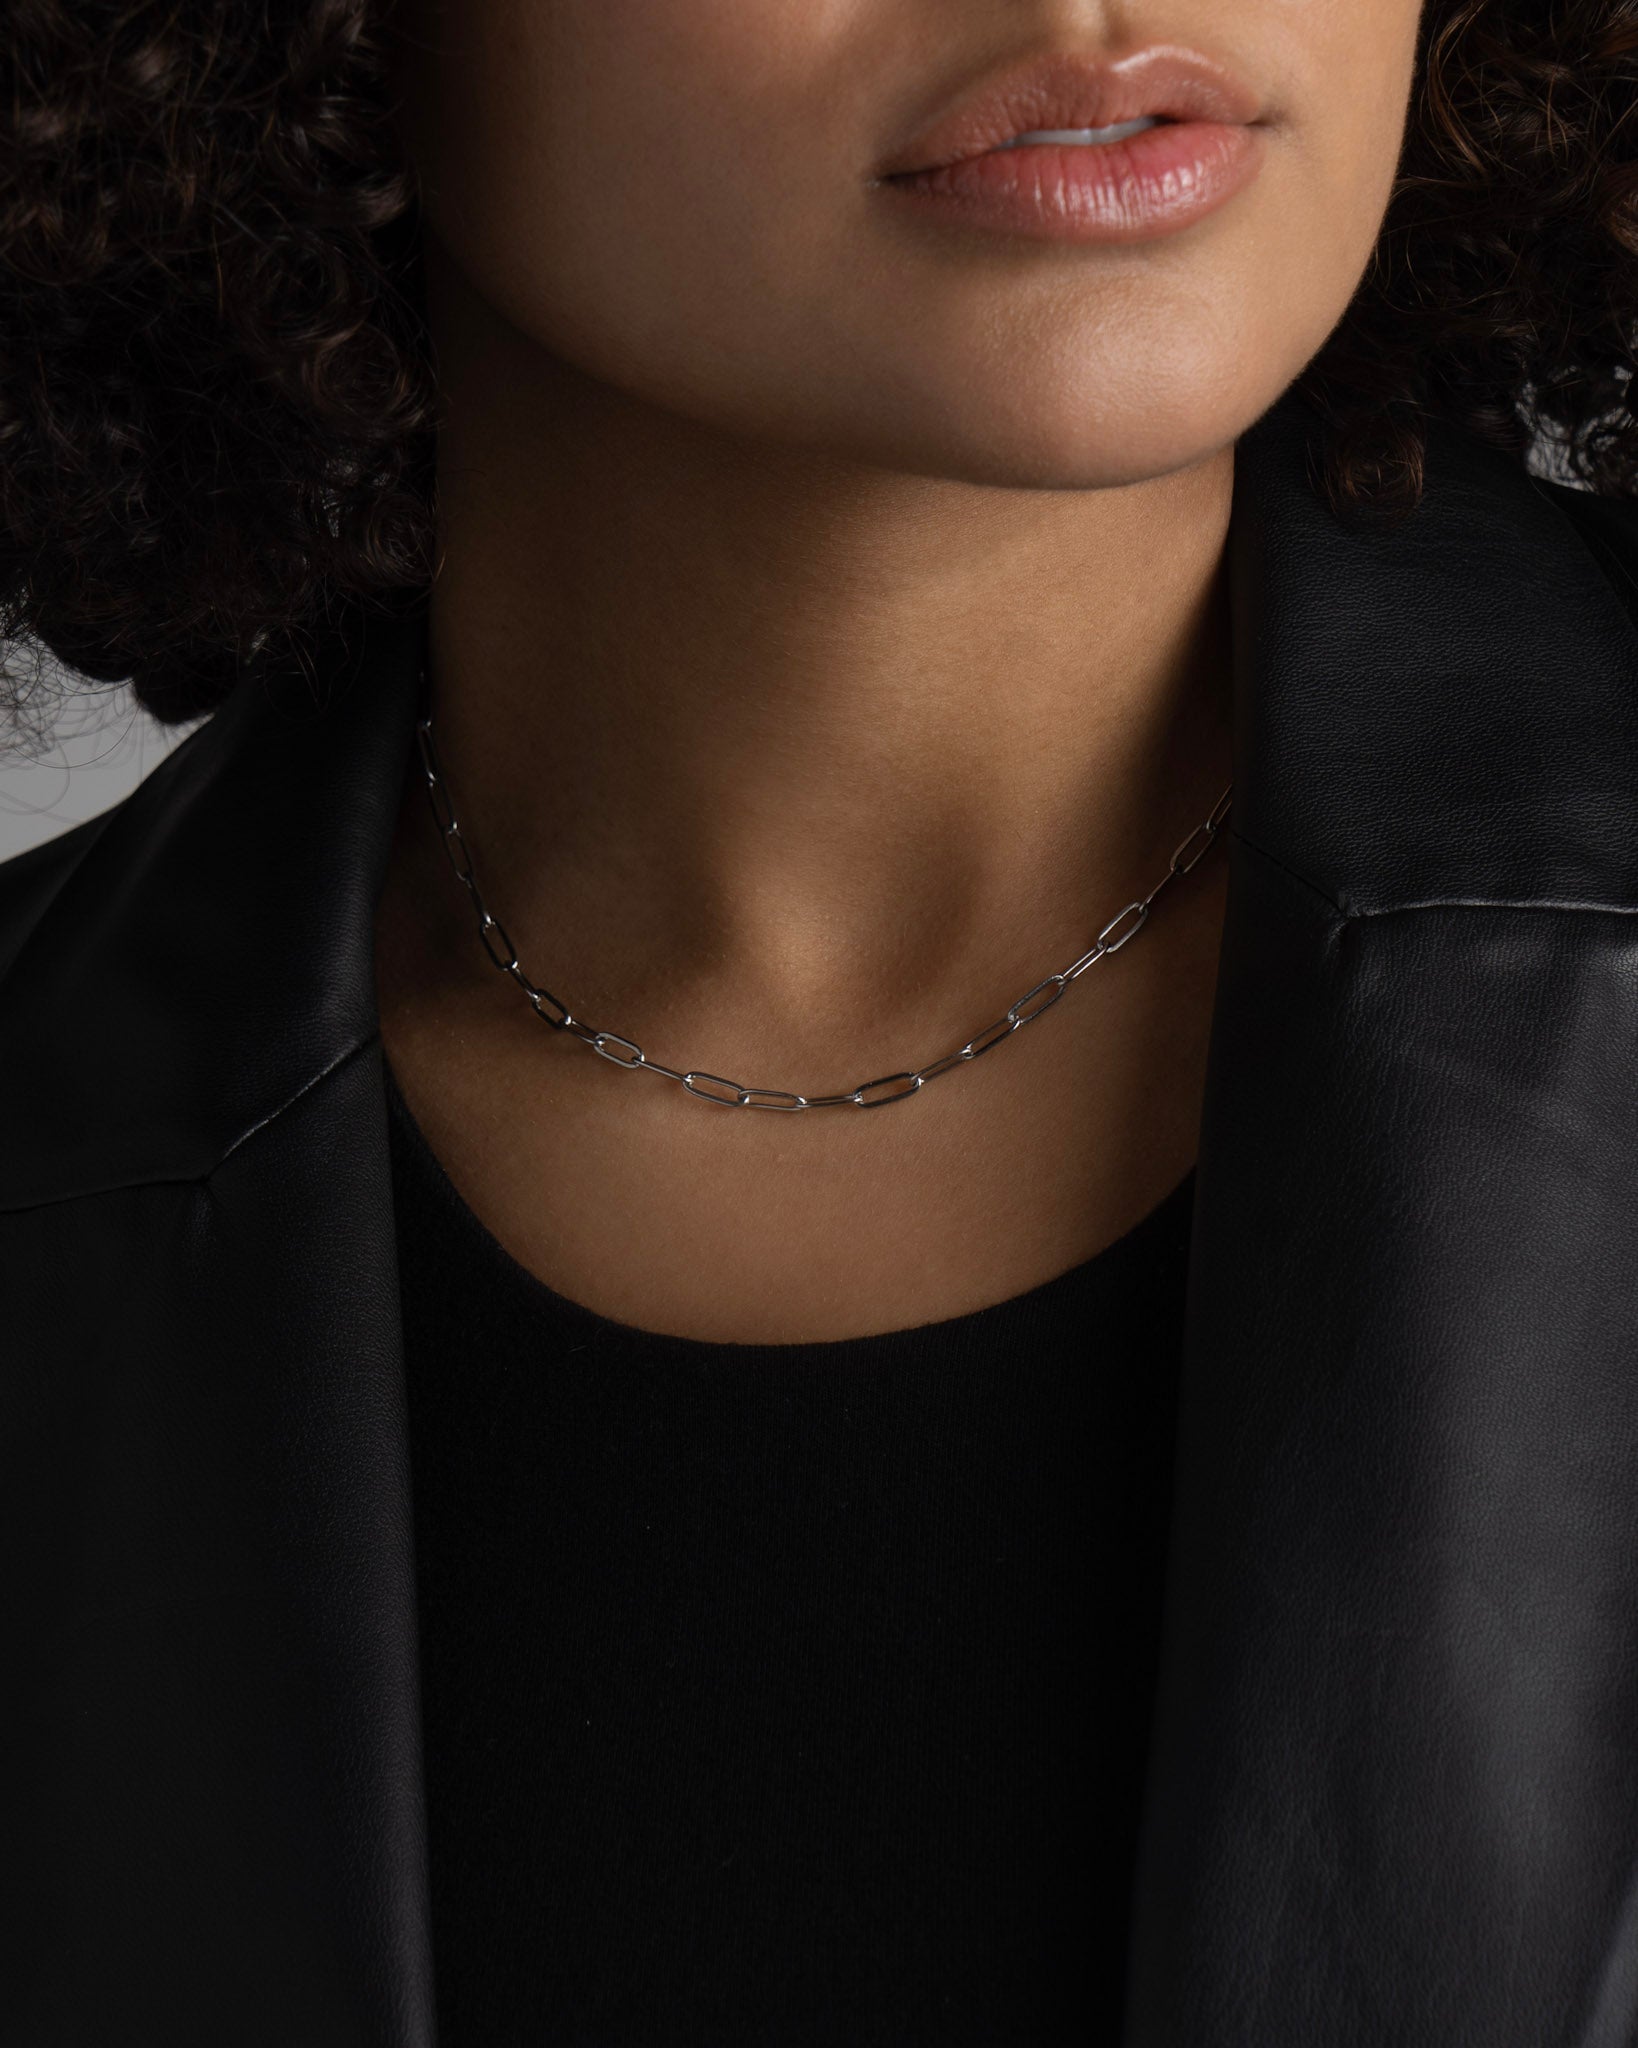 Maritsa women's necklace by Five Jwlry, crafted from a 3mm paperclip chain in silver-colored, water-resistant 316L stainless steel. Available in size 37cm with a 5cm extension. Hypoallergenic with a 2-year warranty.